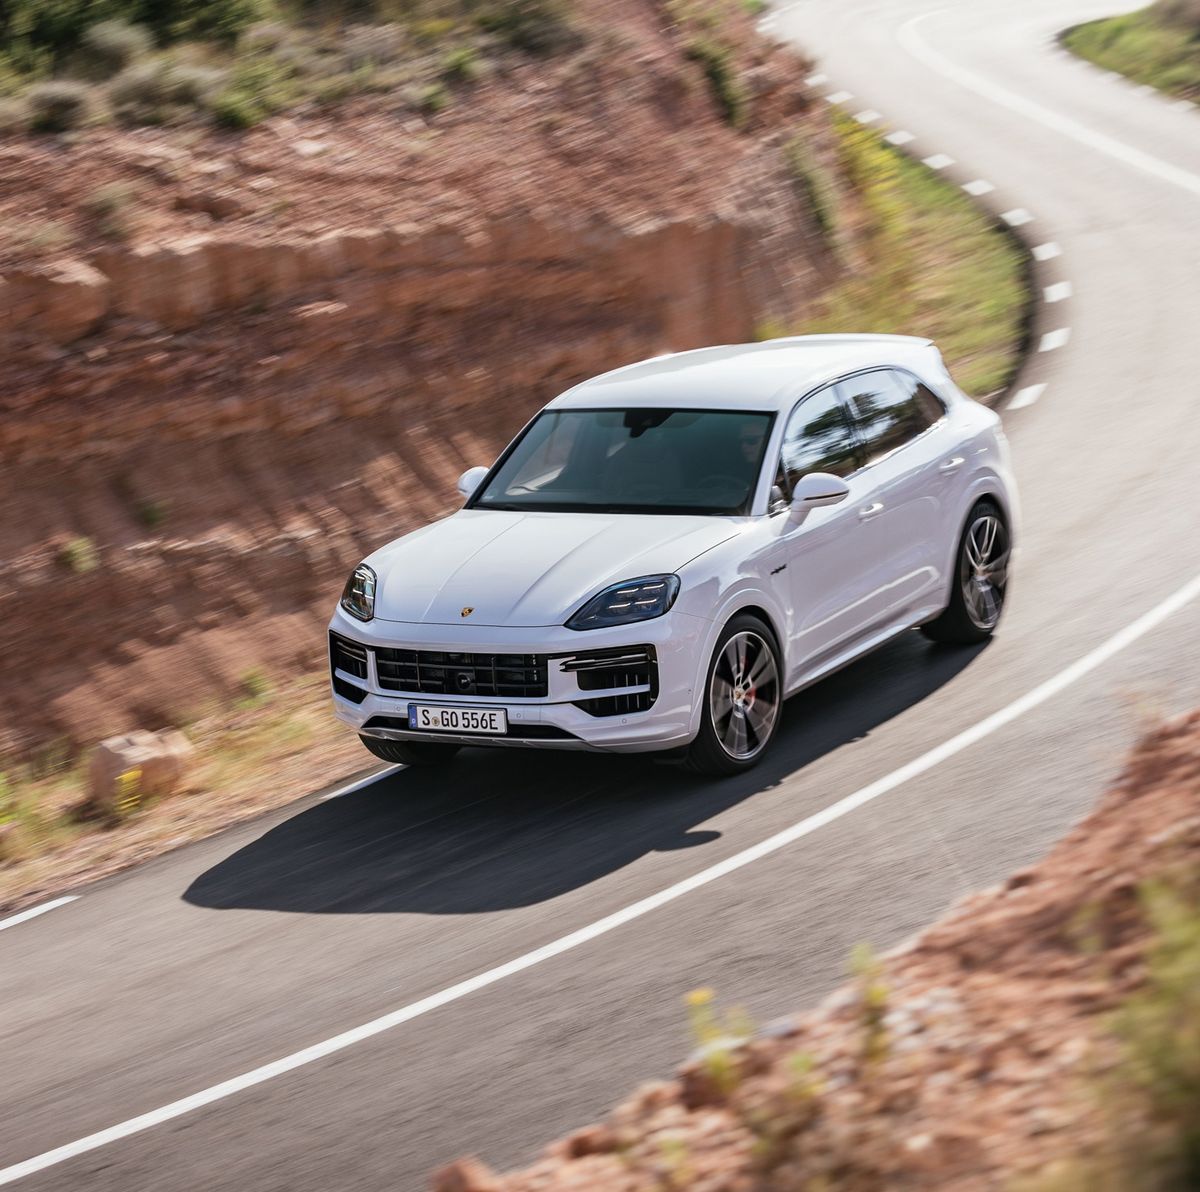 Porsche Readying 2024 Cayenne Turbo PHEV With Over 700 HP